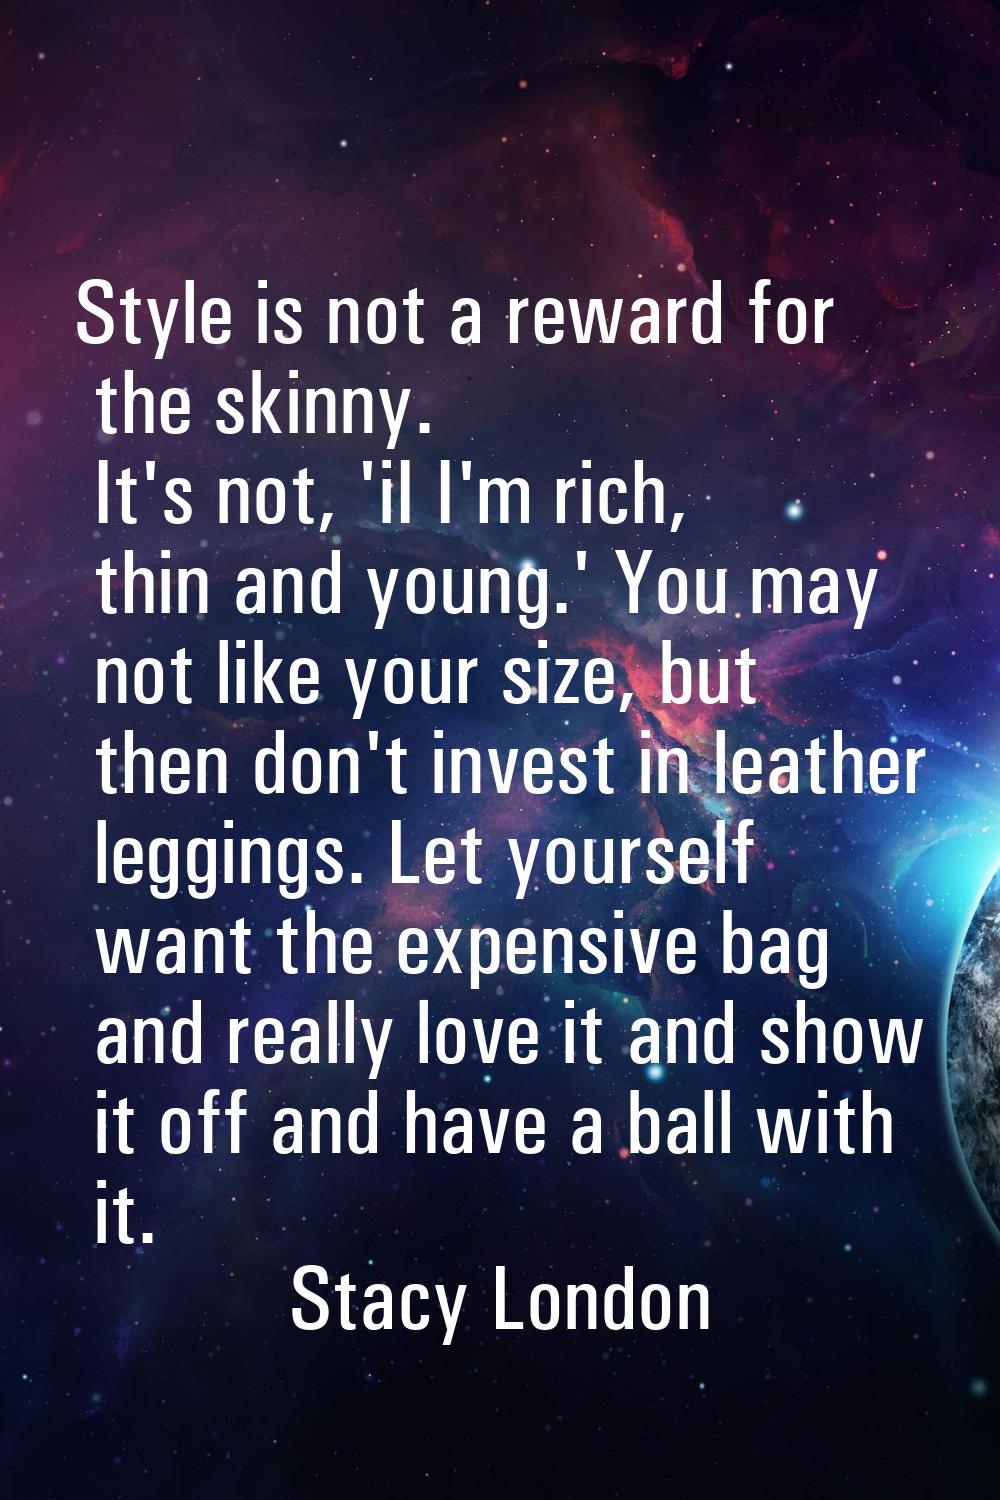 Style is not a reward for the skinny. It's not, 'iI I'm rich, thin and young.' You may not like you